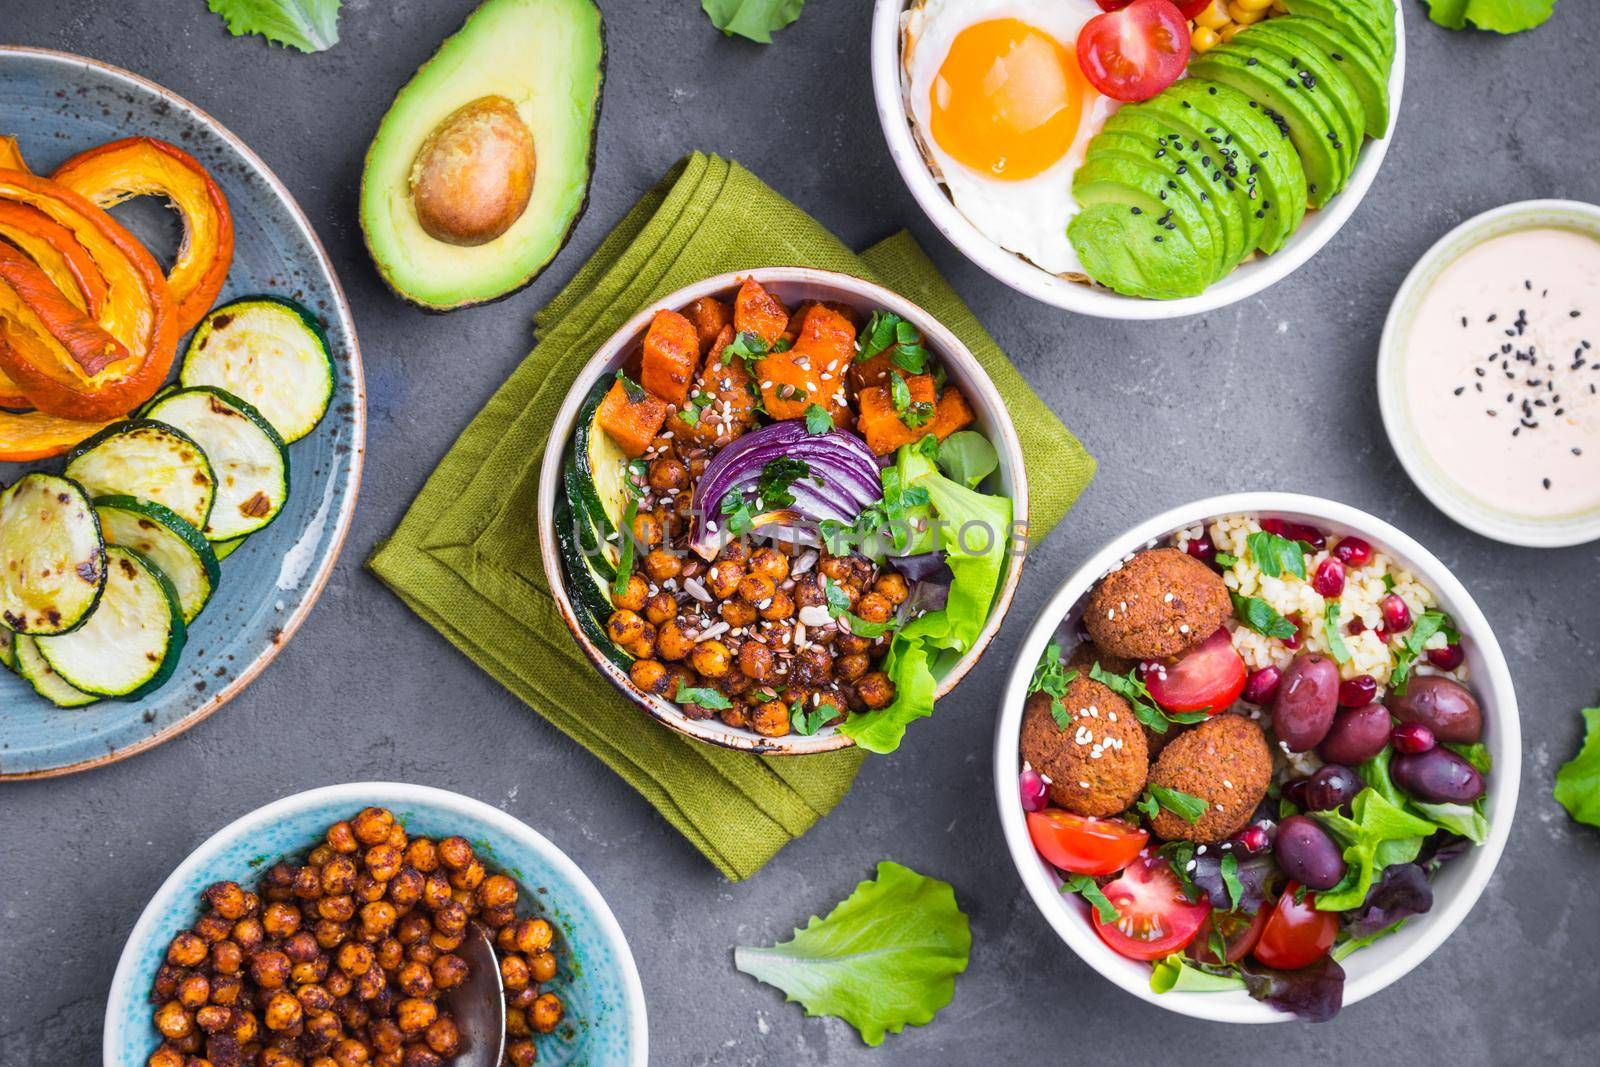 Mixed healthy vegetarian salads with vegetables, sweet potato, falafel, bulgur, avocado, eggs. Assorted buddha bowl salads. Vegetarian food. Healthy lunch/dinner. Salad in bowl. Ingredients for making